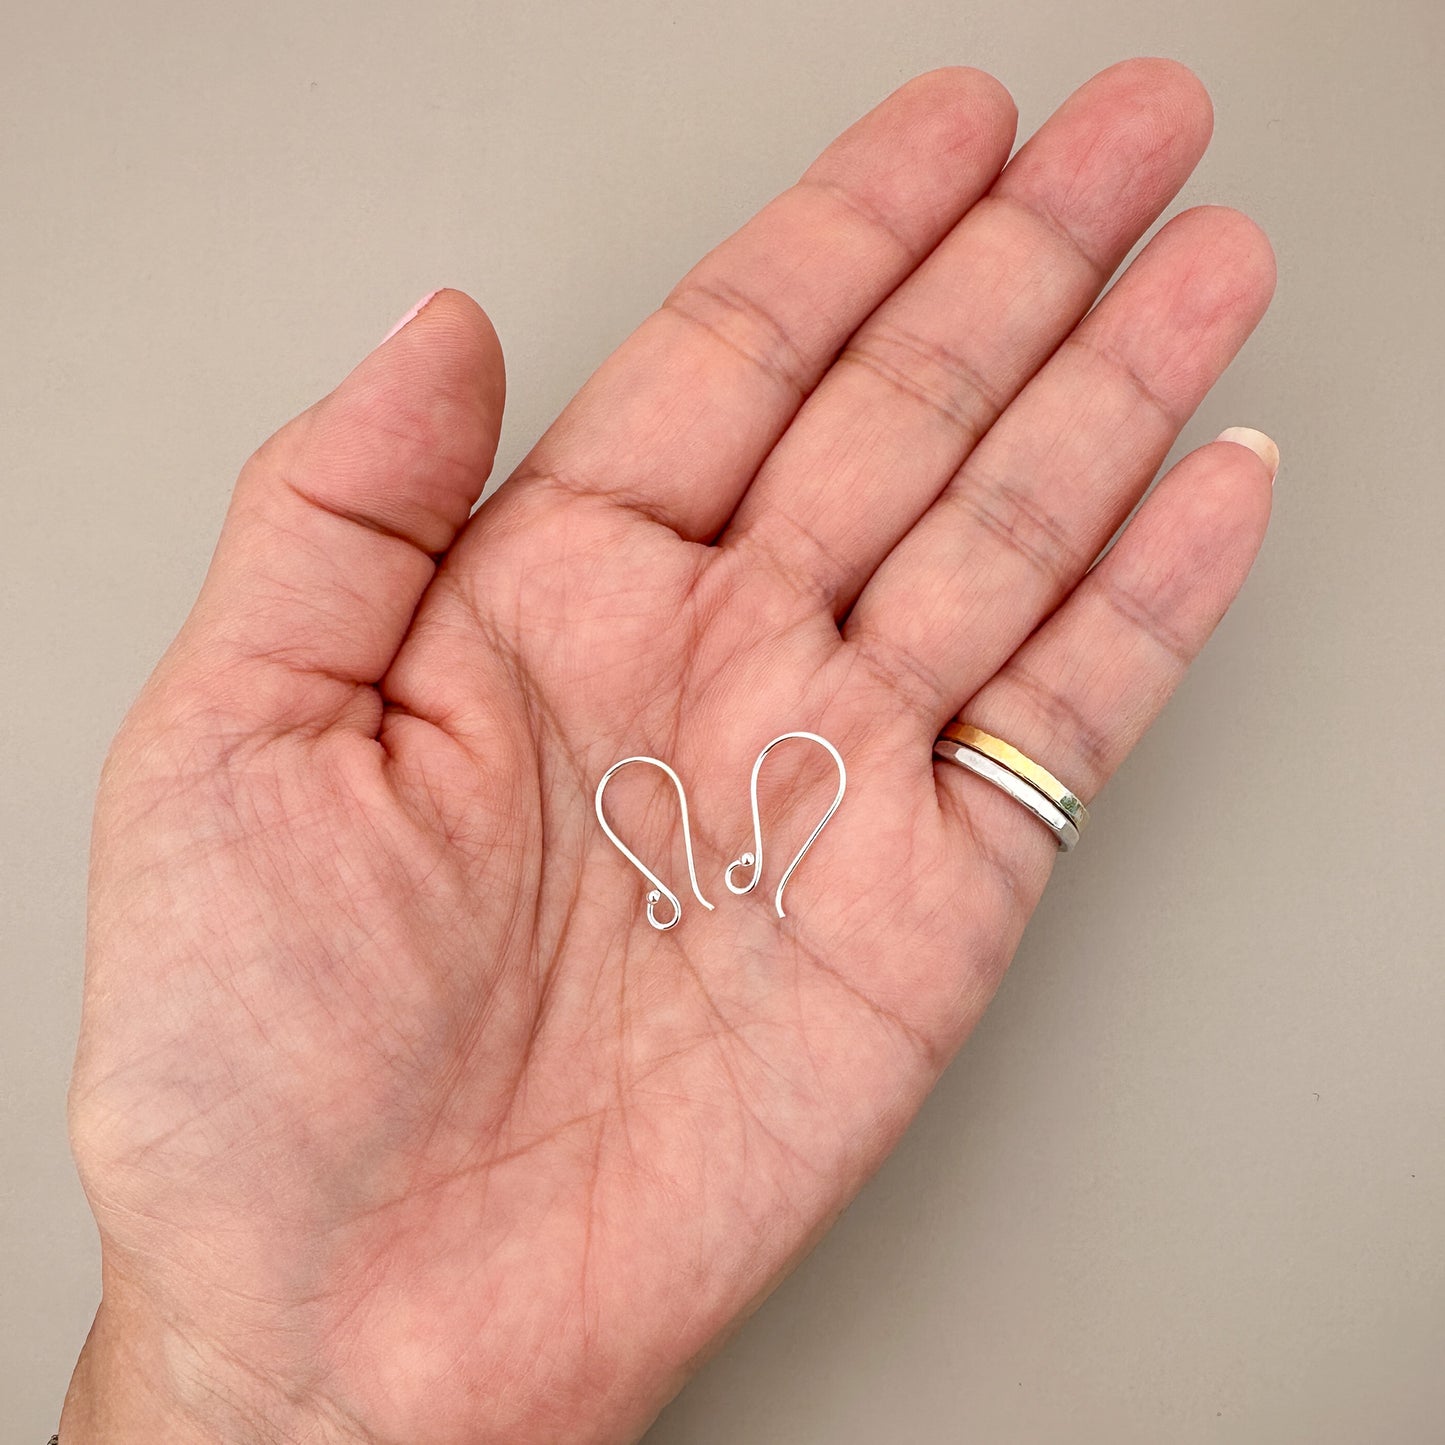 Shepherd Earwire with Ball (Sterling Silver) - 1 pair (S686)